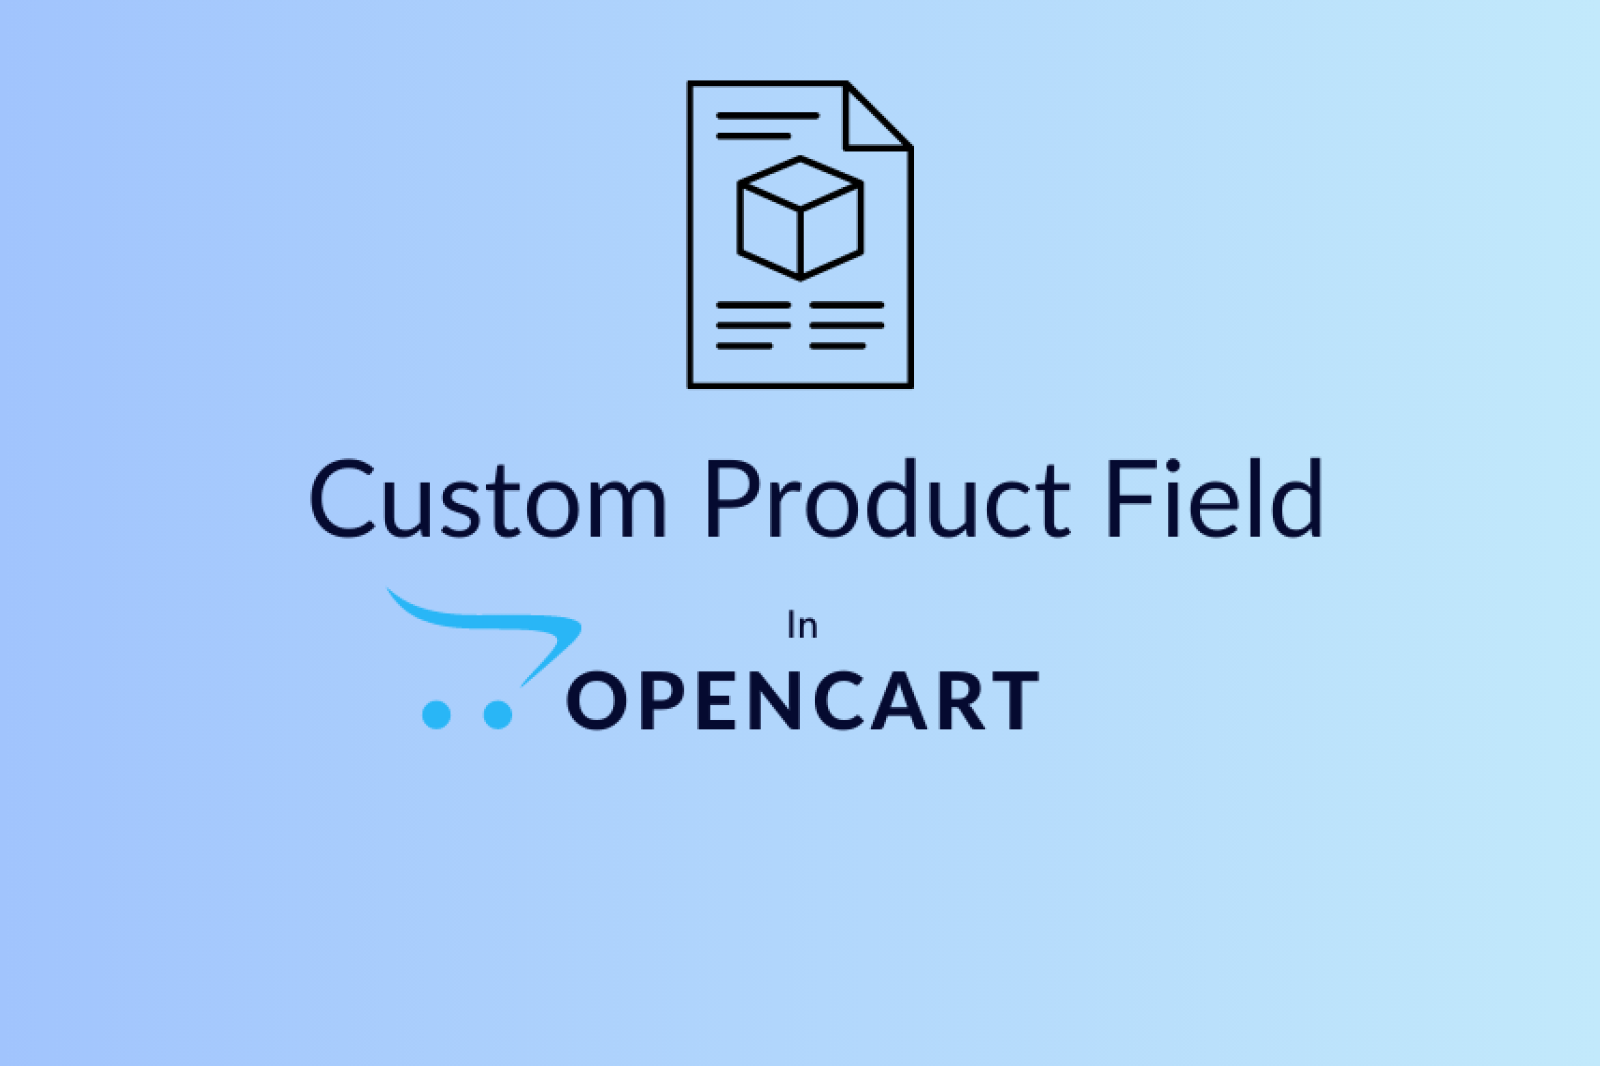 How To Add Custom Product Field In OpenCart